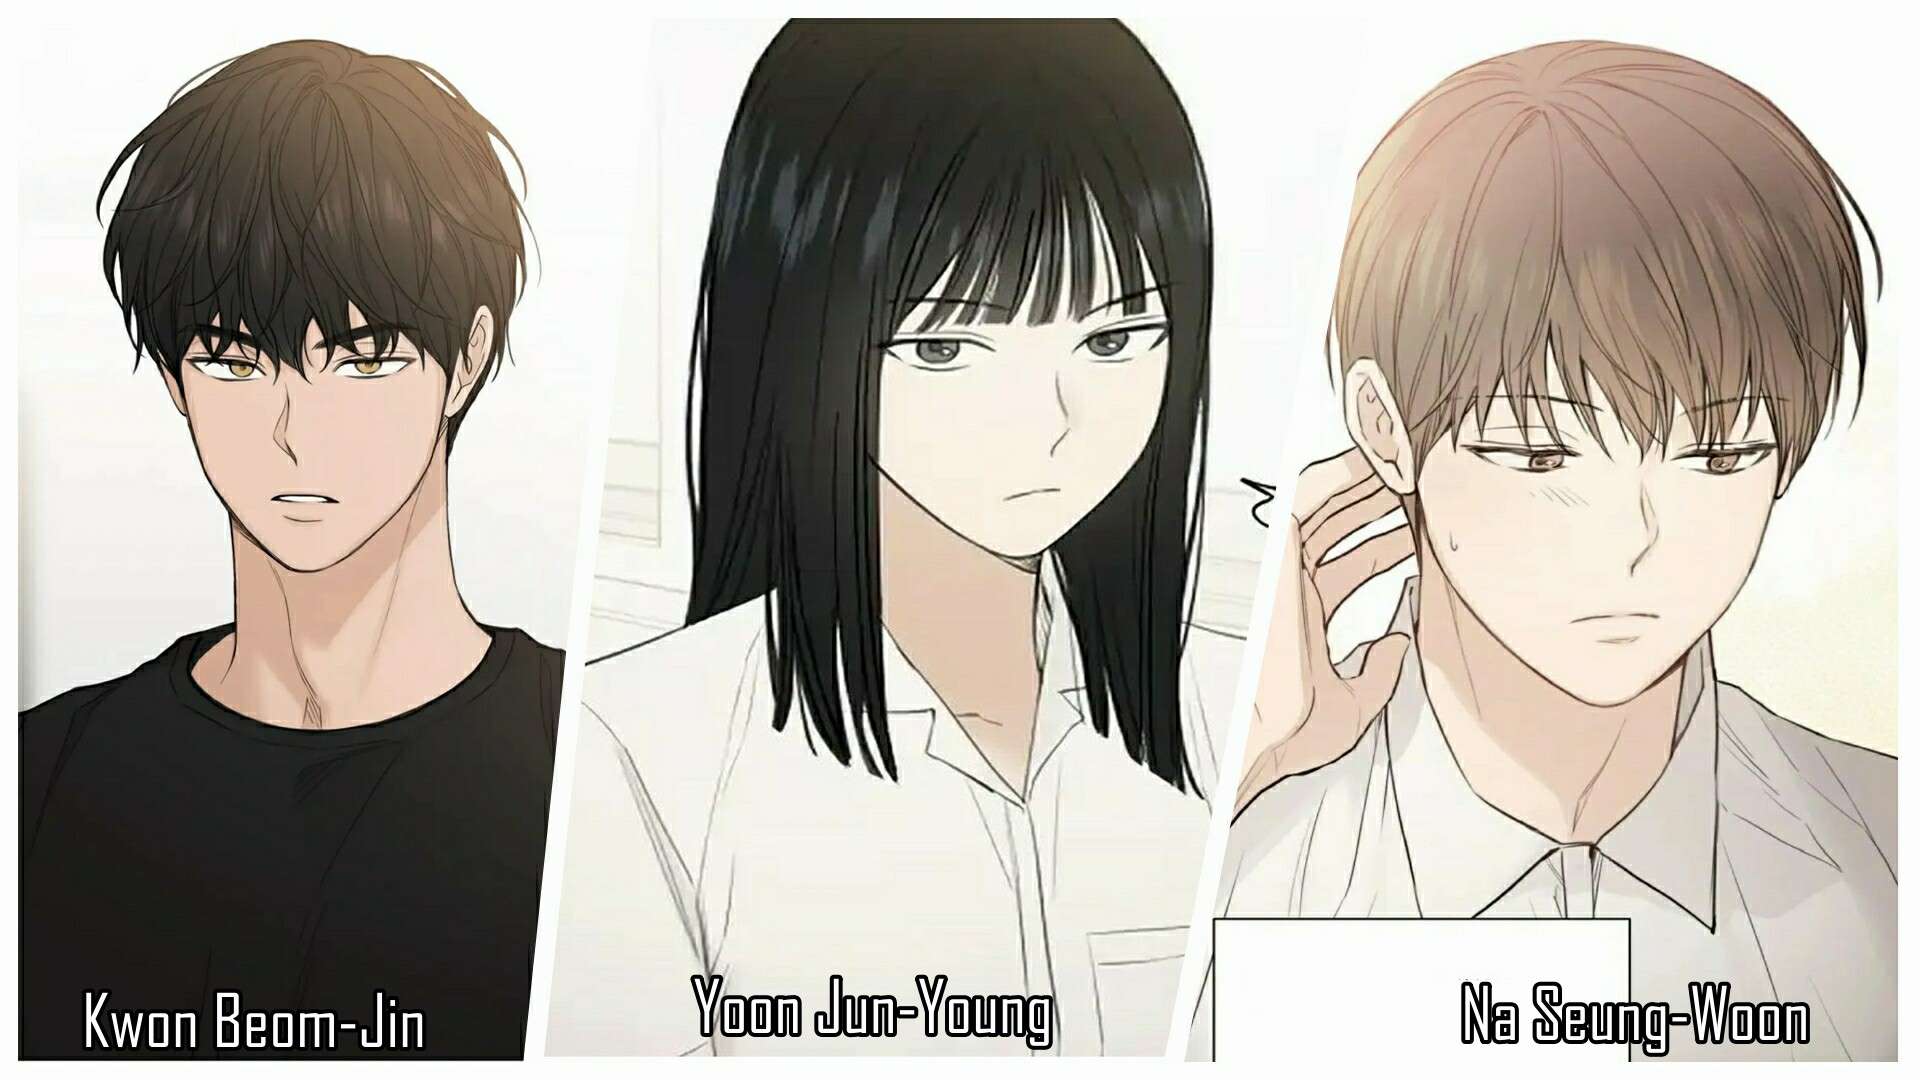 Kwon Beom-Jin (Left), Yoon Jun-Young (Middle), And Na Seung-Woon (Right) - Just Twilight Chapter 1